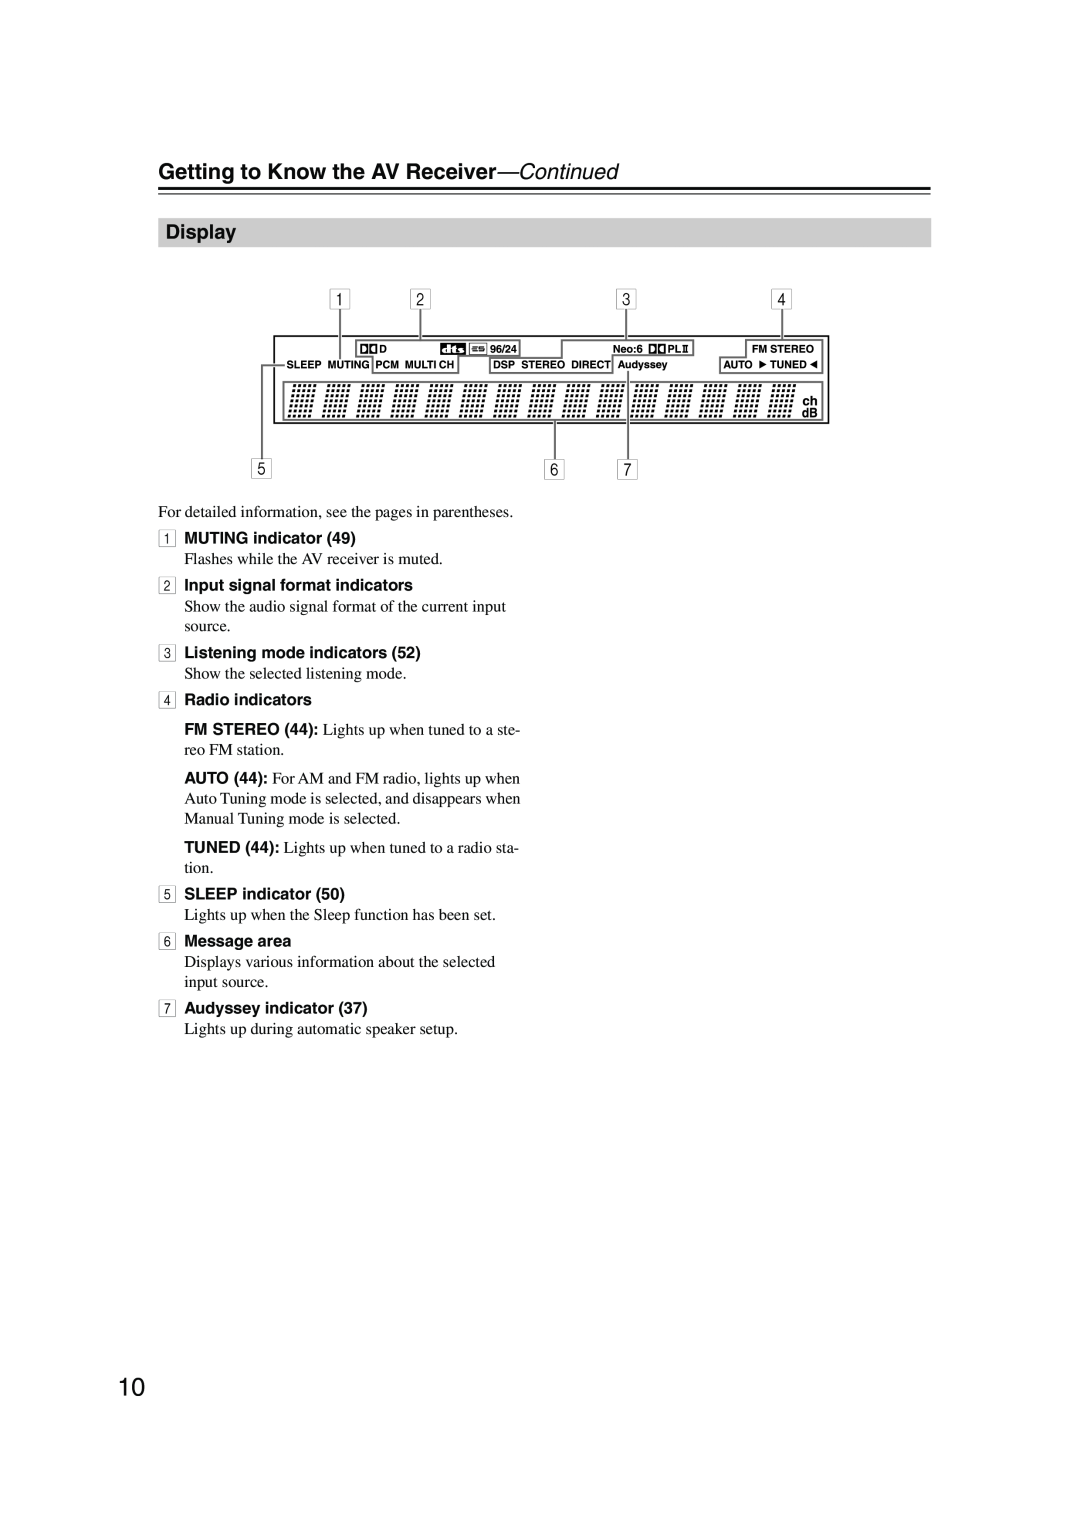 Onkyo HT-SP904 instruction manual Getting to Know the AV Receiver—Continued, Display 